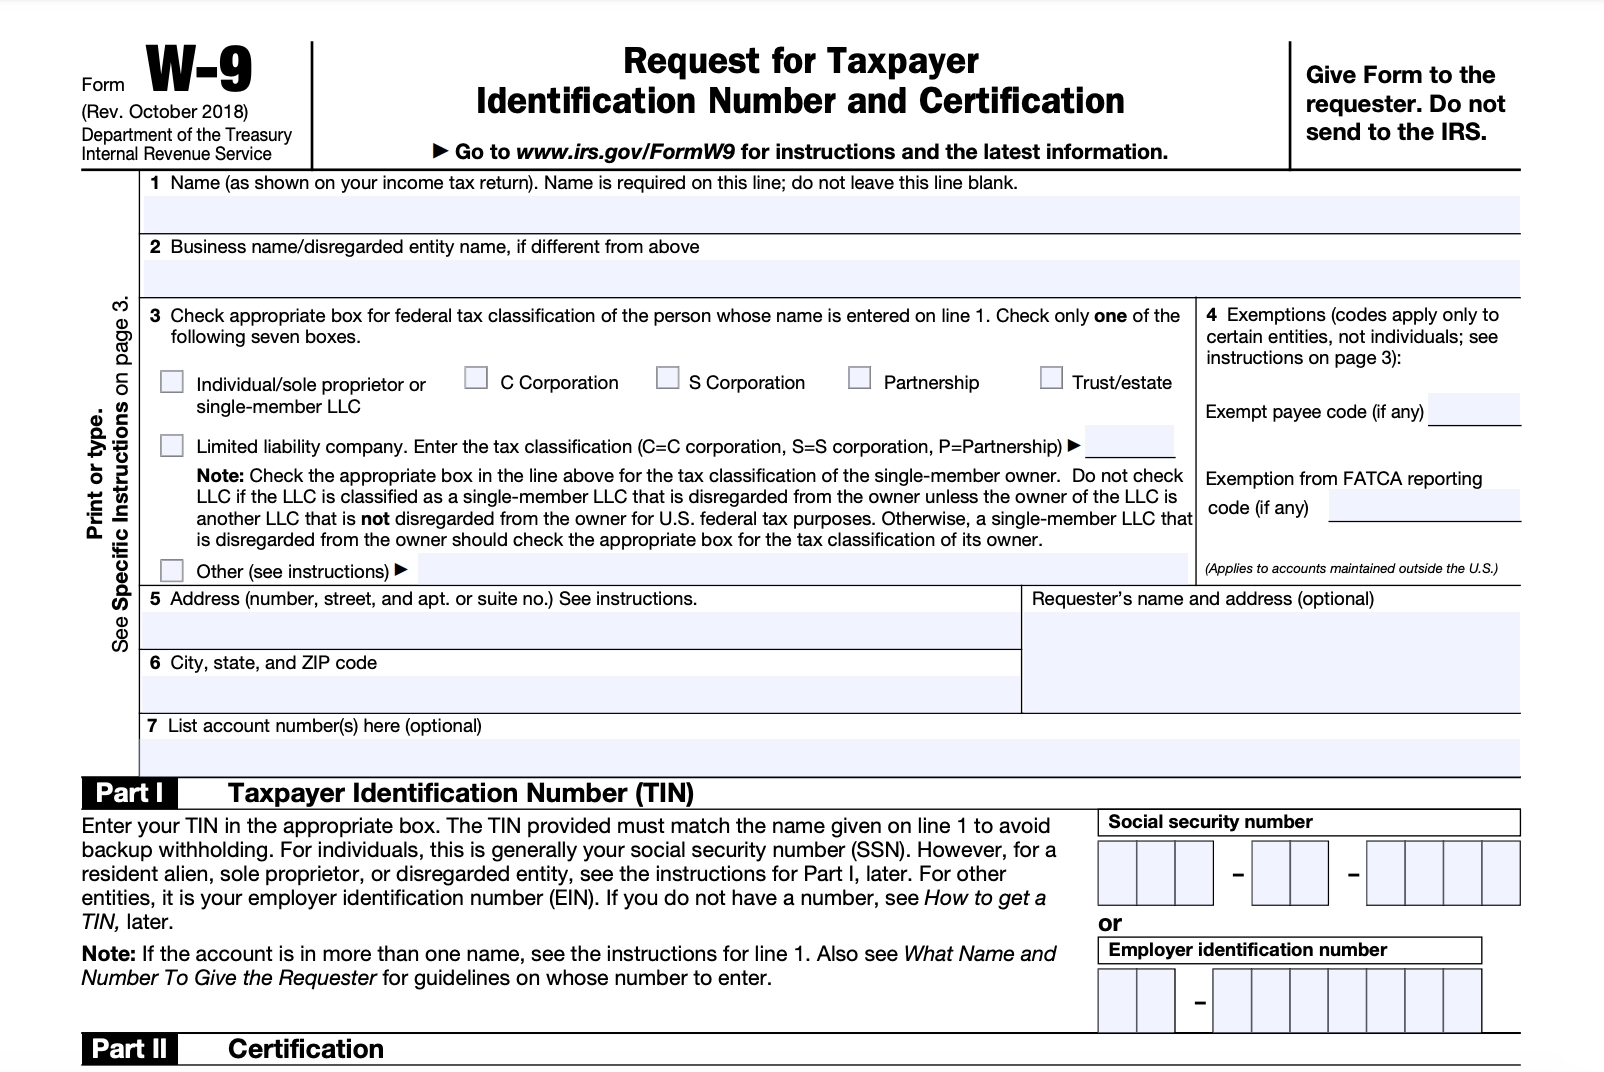 W-9 Form - Fill Out The Irs W-9 Form Online For 2019 | Smallpdf-2021 W-9 Template